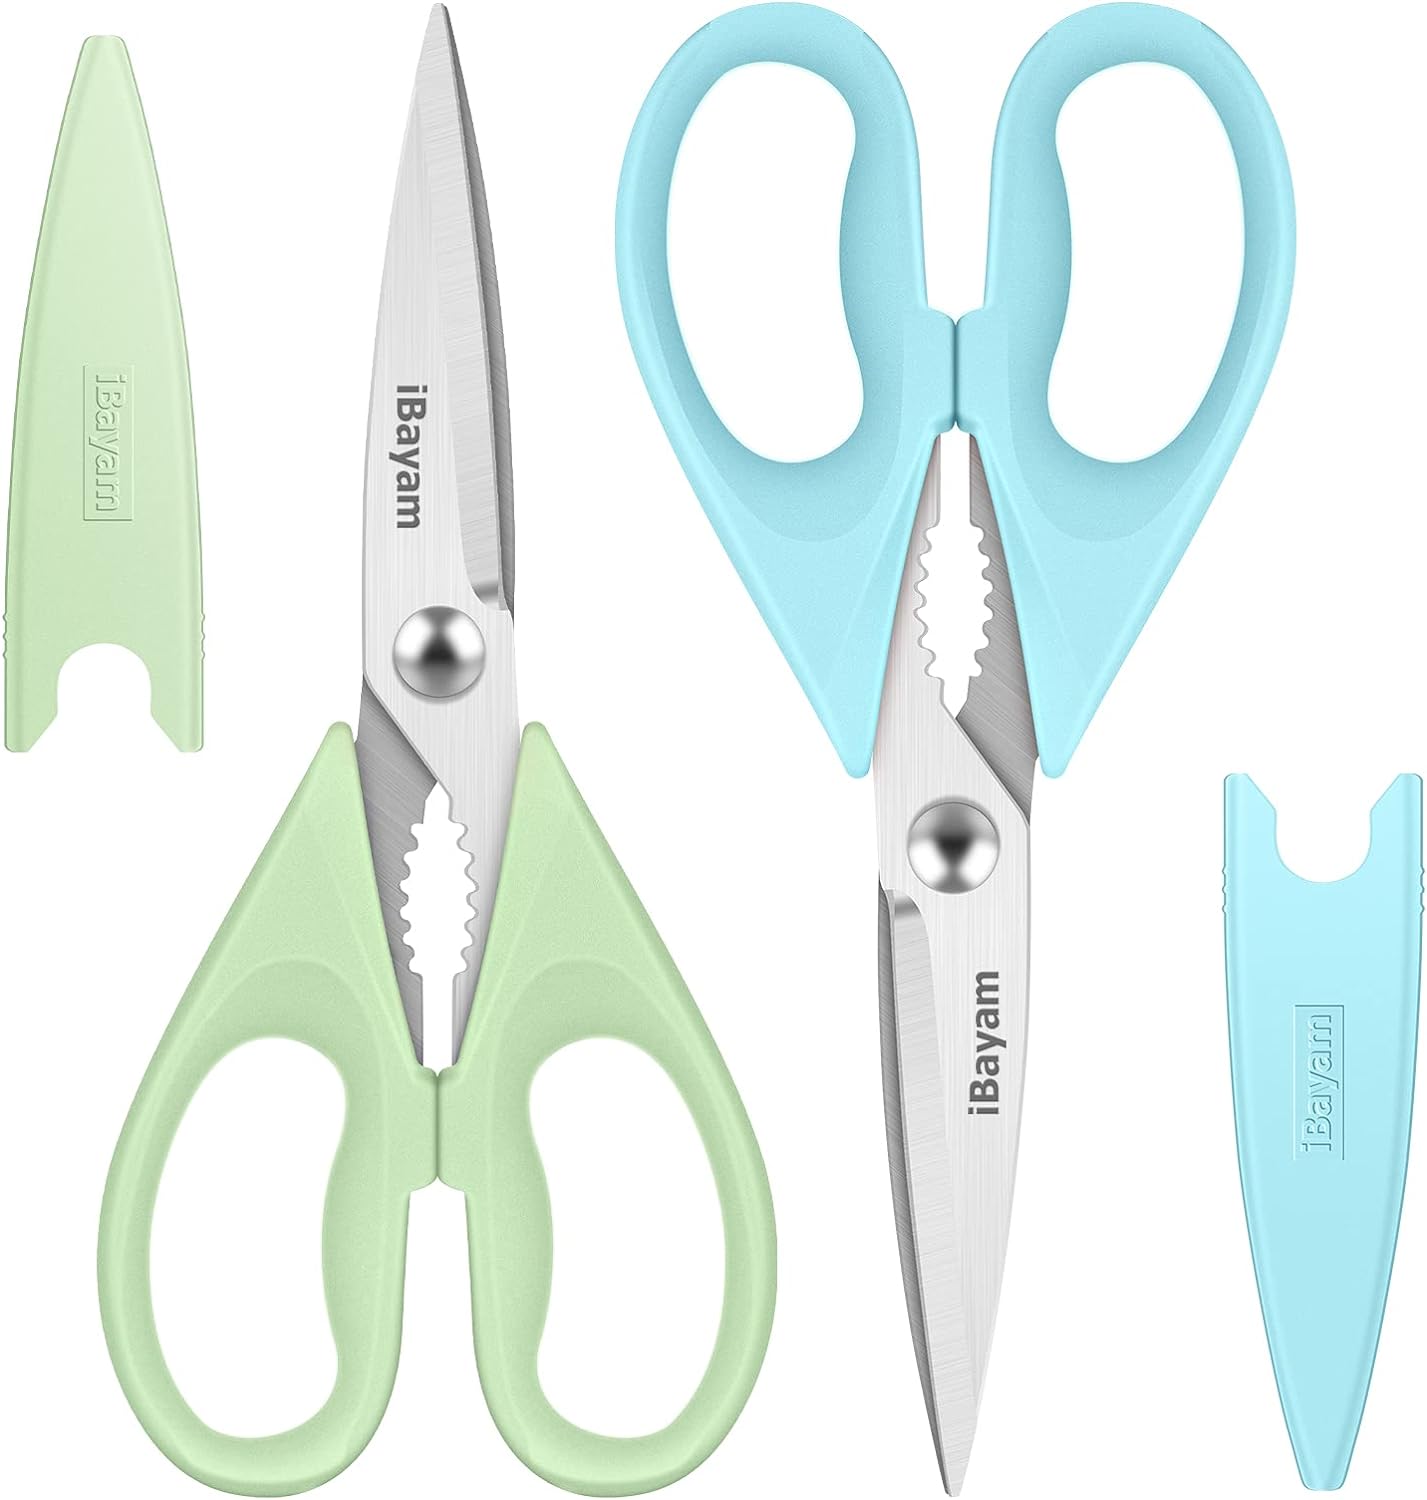 Wholesale prices with free shipping all over United States Kitchen Poultry Shears, iBayam Meat Scissors Heavy Duty Dishwasher Safe Food Cooking Shears All Purpose Stainless Steel Utility Scissors, 2-Pack, Black, Aqua Sky - Steven Deals